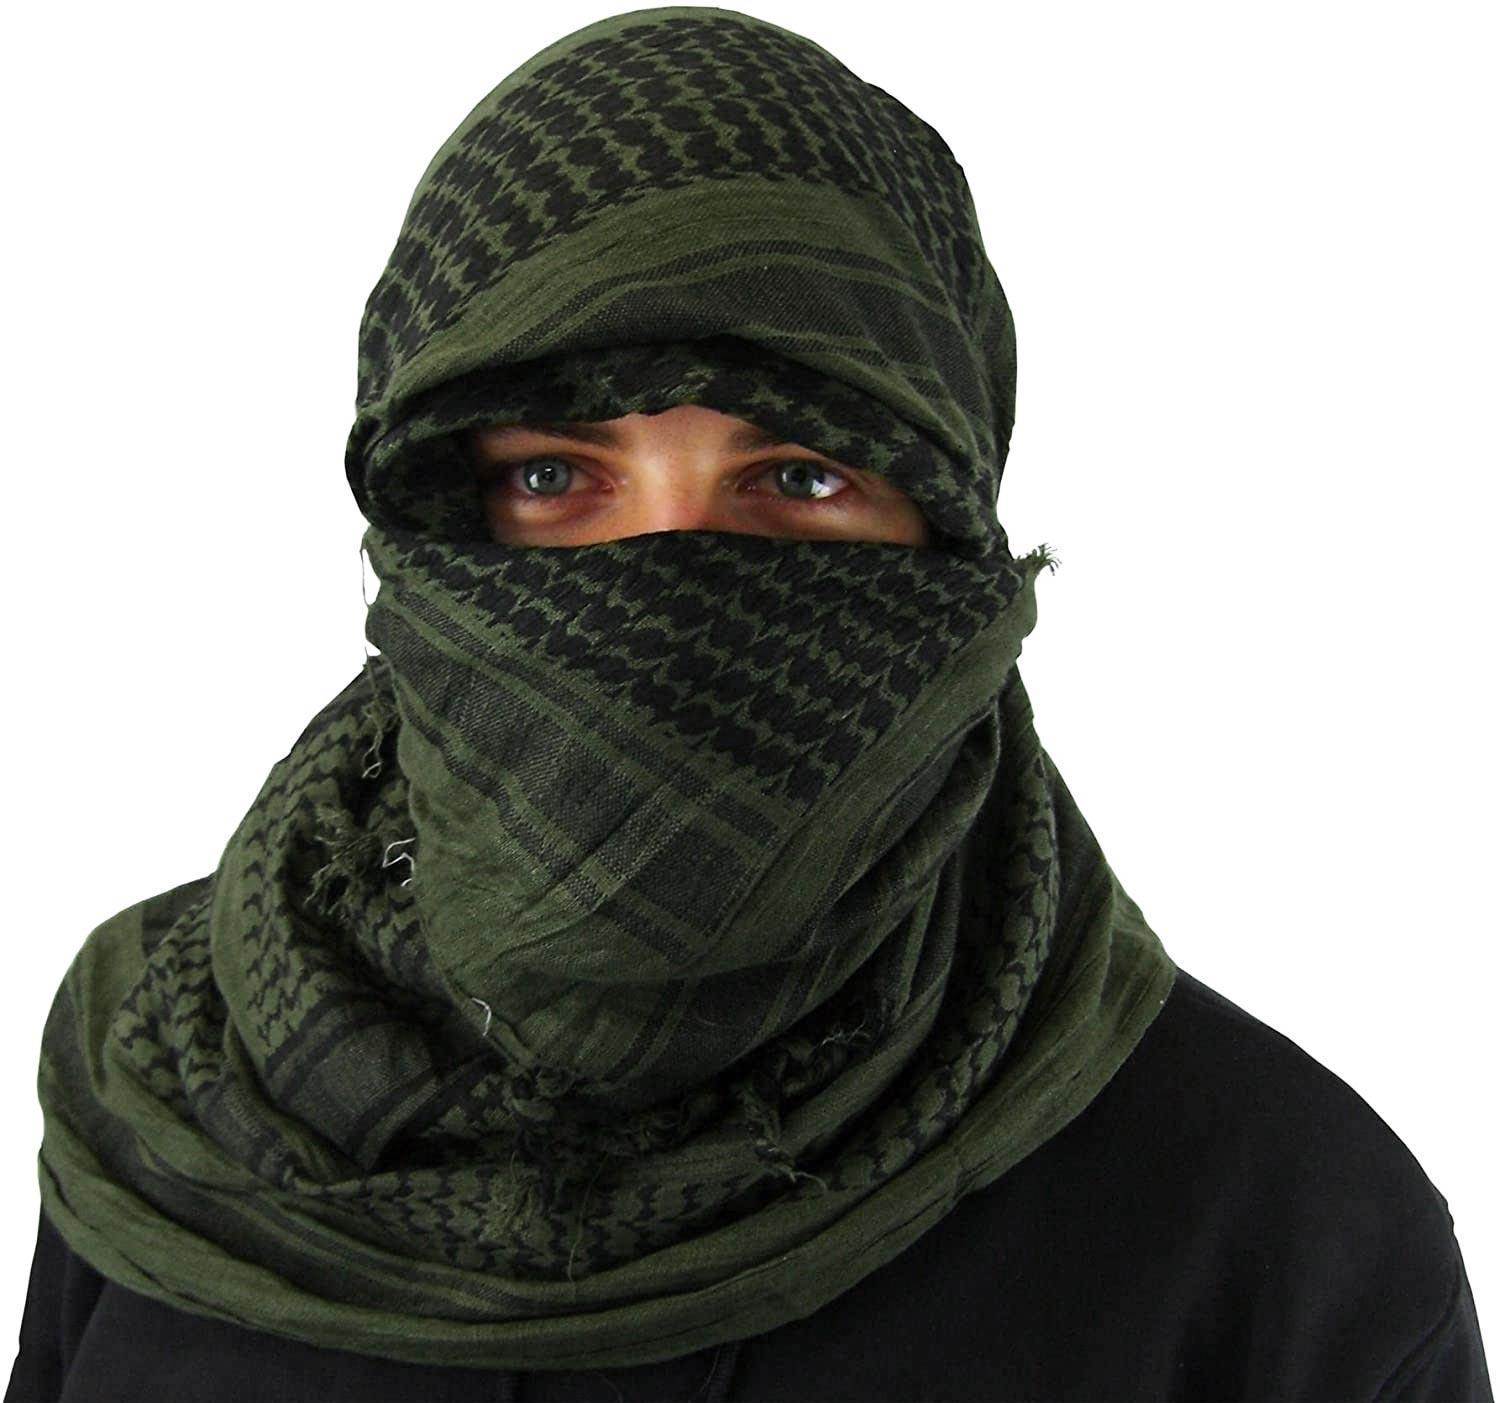 Maddog Shemagh Tactical Desert Scarf From Paintball Deals